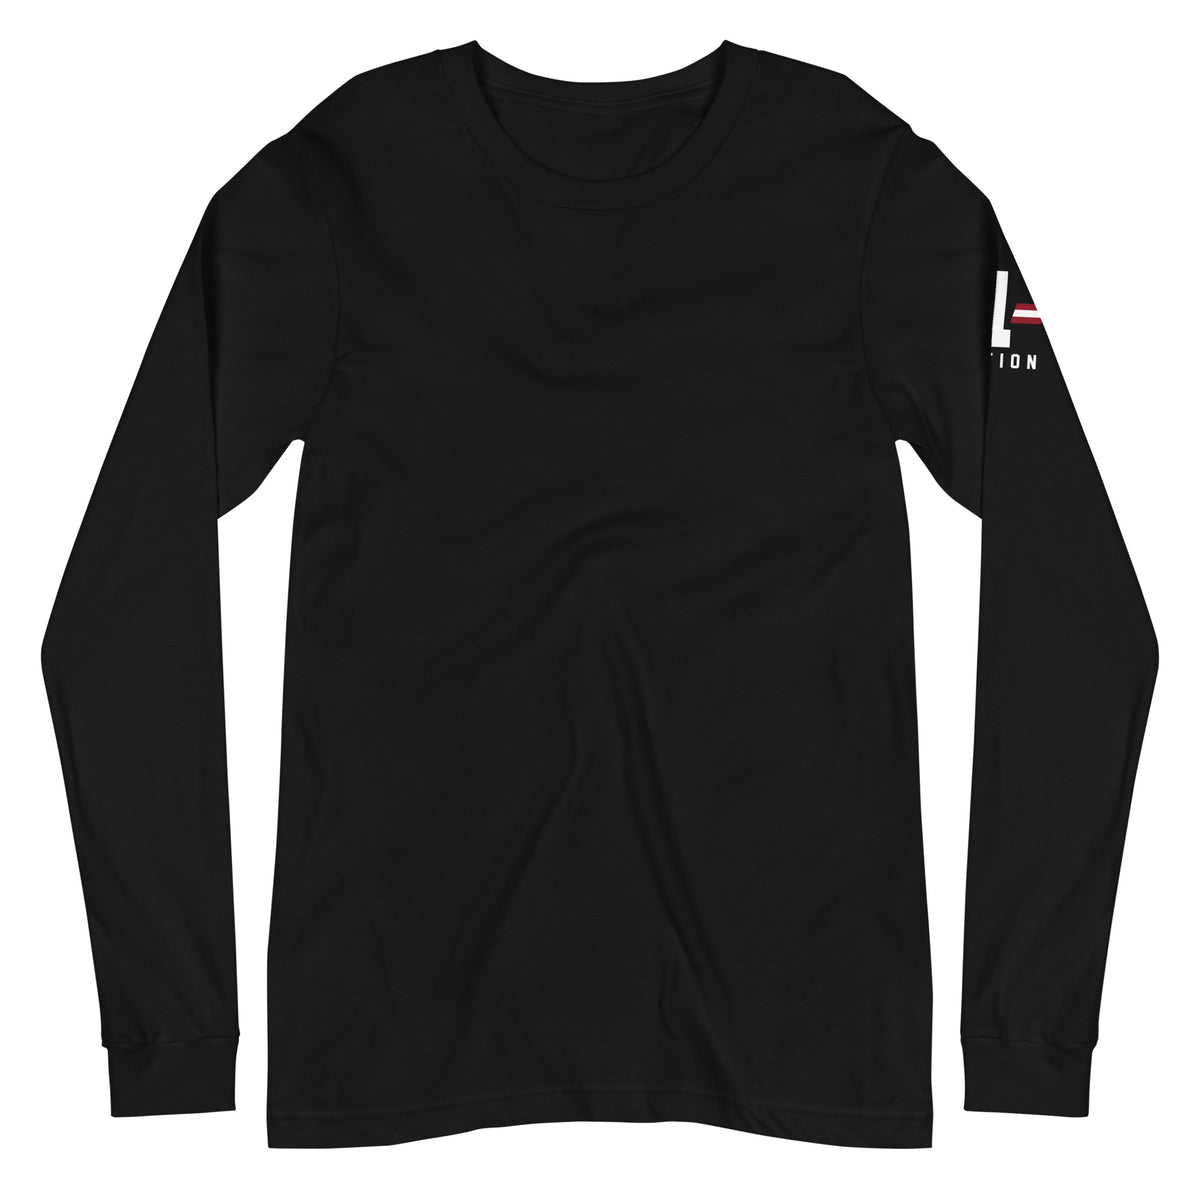 Glory Wing: The Constitution Long Sleeve